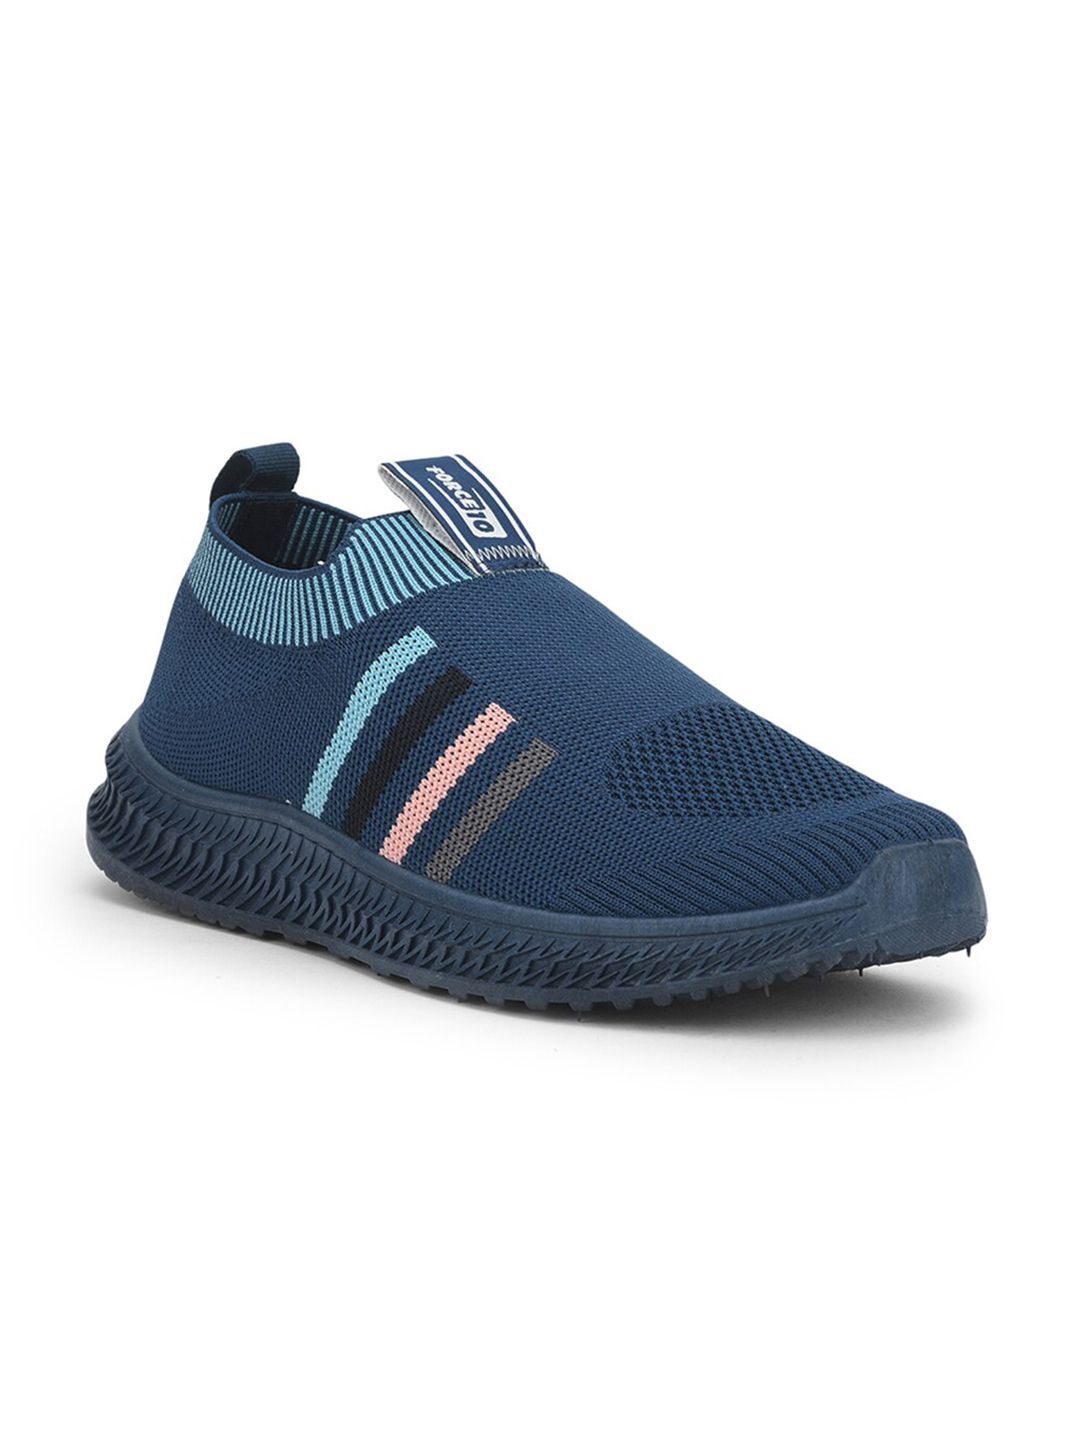 Liberty Women Blue Mesh Running Non-Marking Shoes Price in India